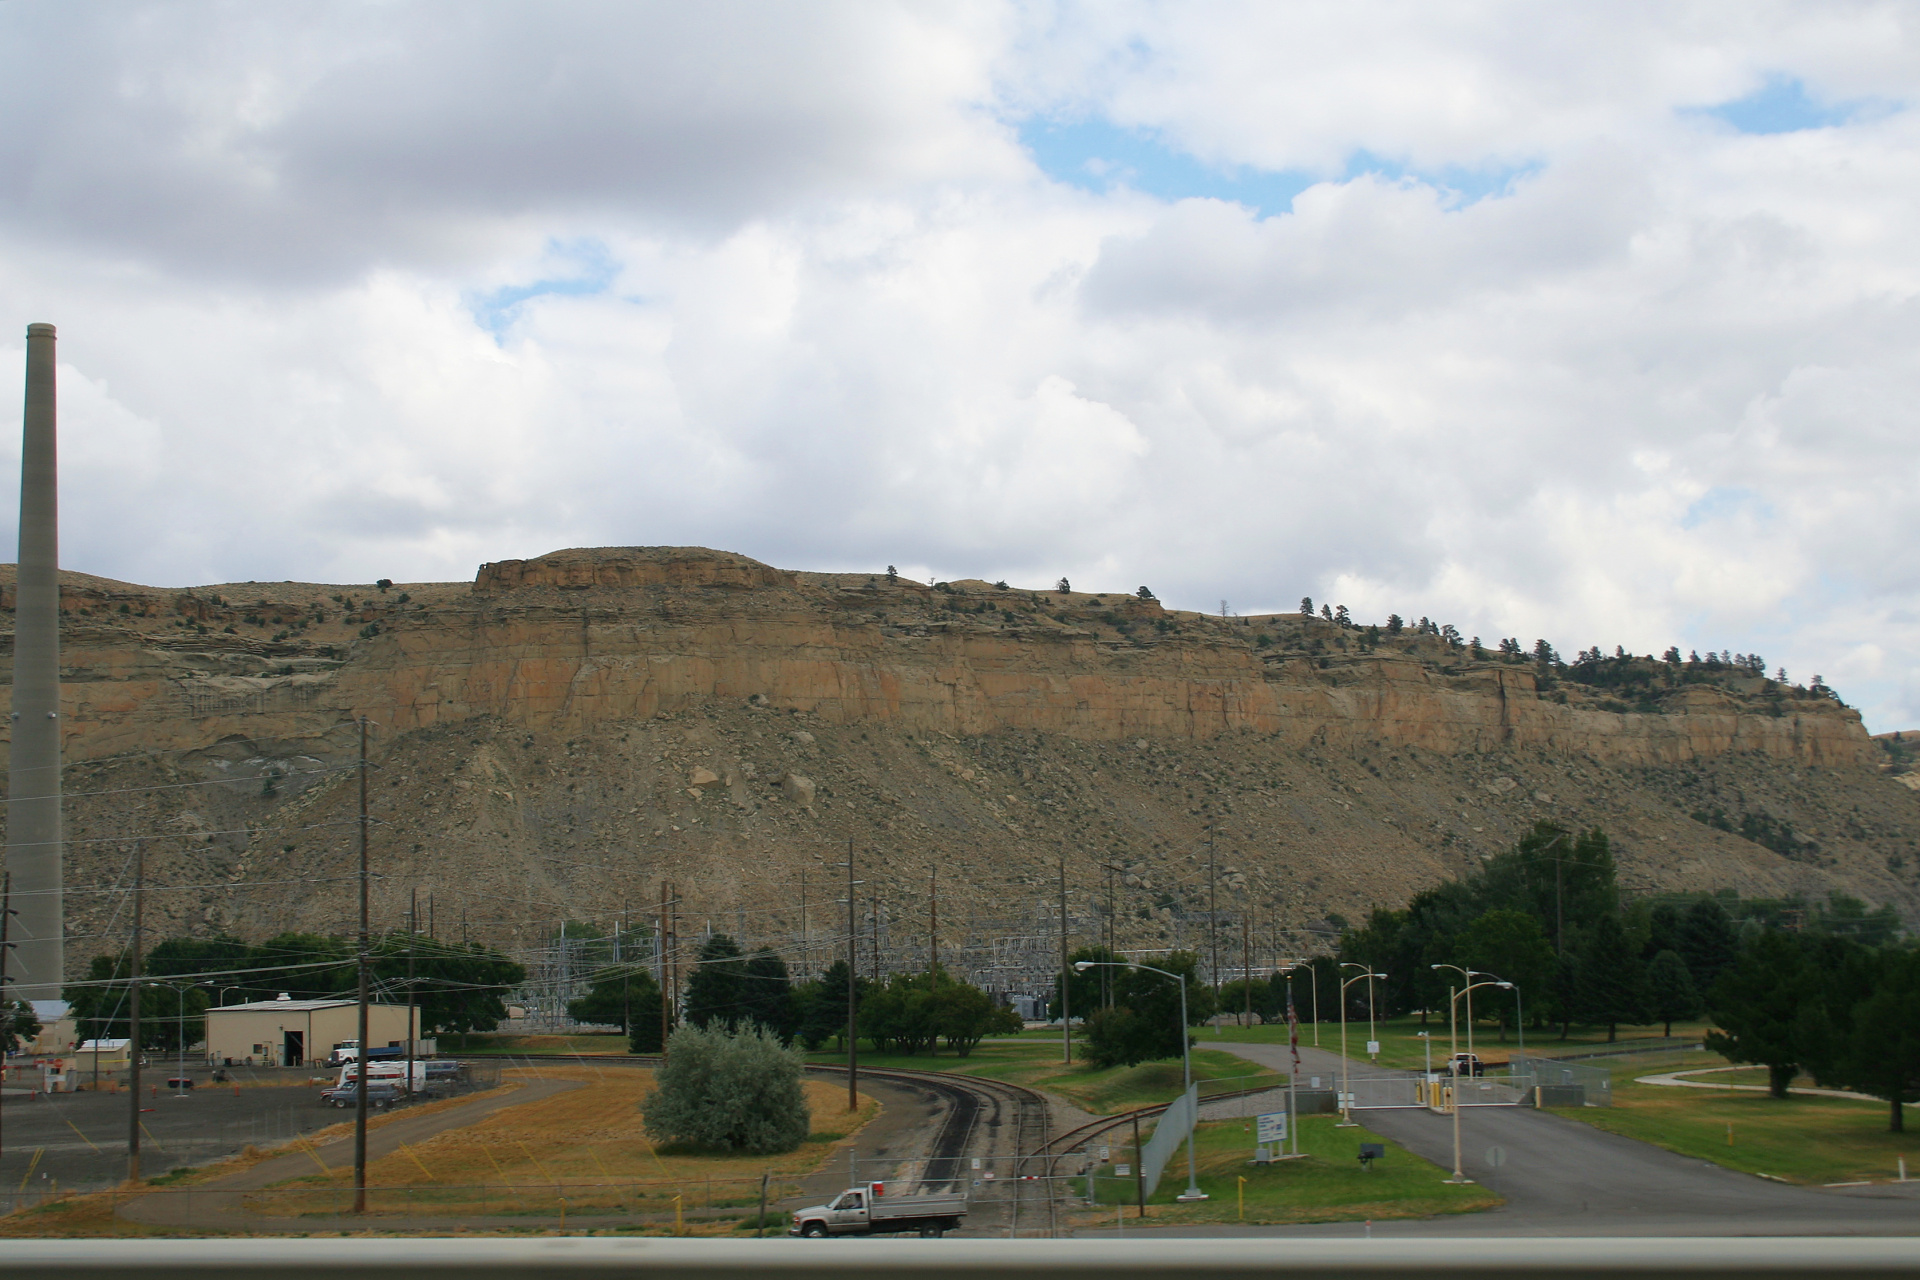 Sacrifice Cliff (Travels » US Trip 1: Cheyenne Country » The Journey » A Different Billings)